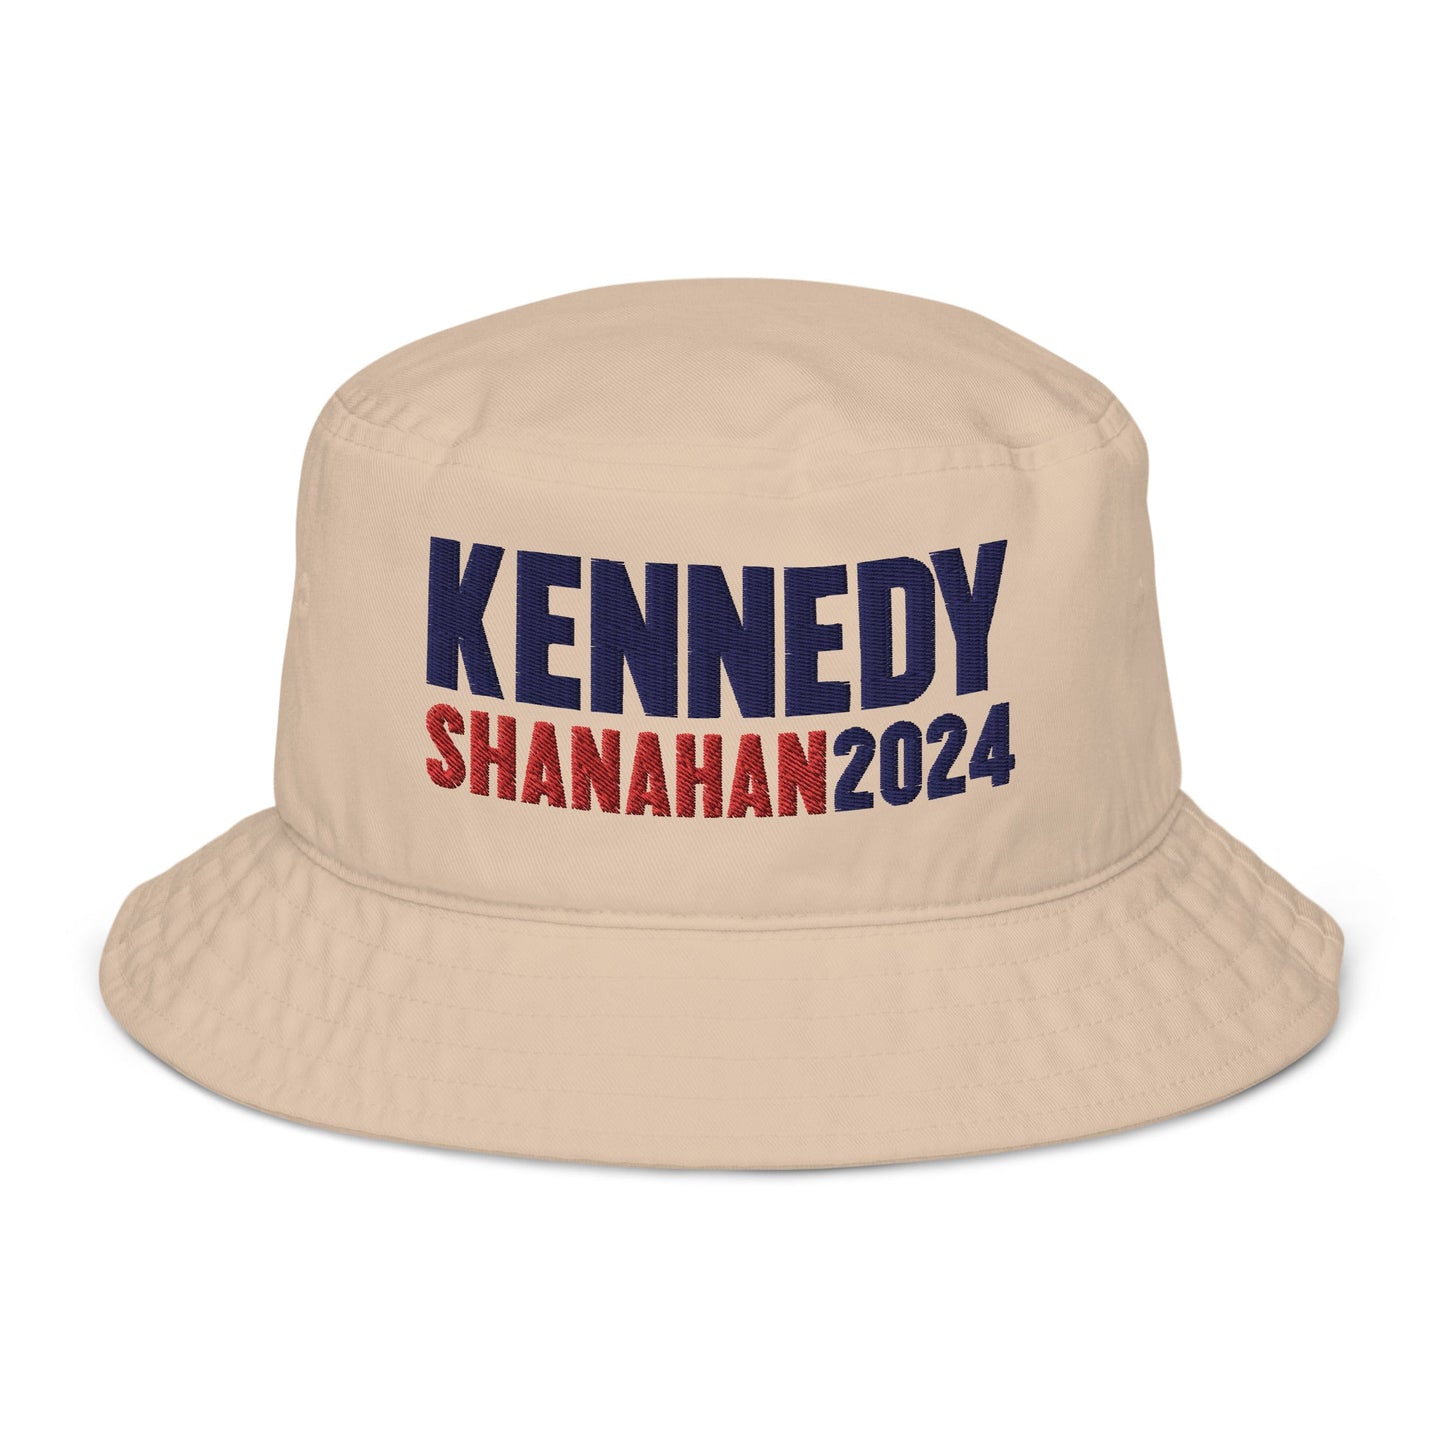 Kennedy Shanahan Bucket Hat - TEAM KENNEDY. All rights reserved